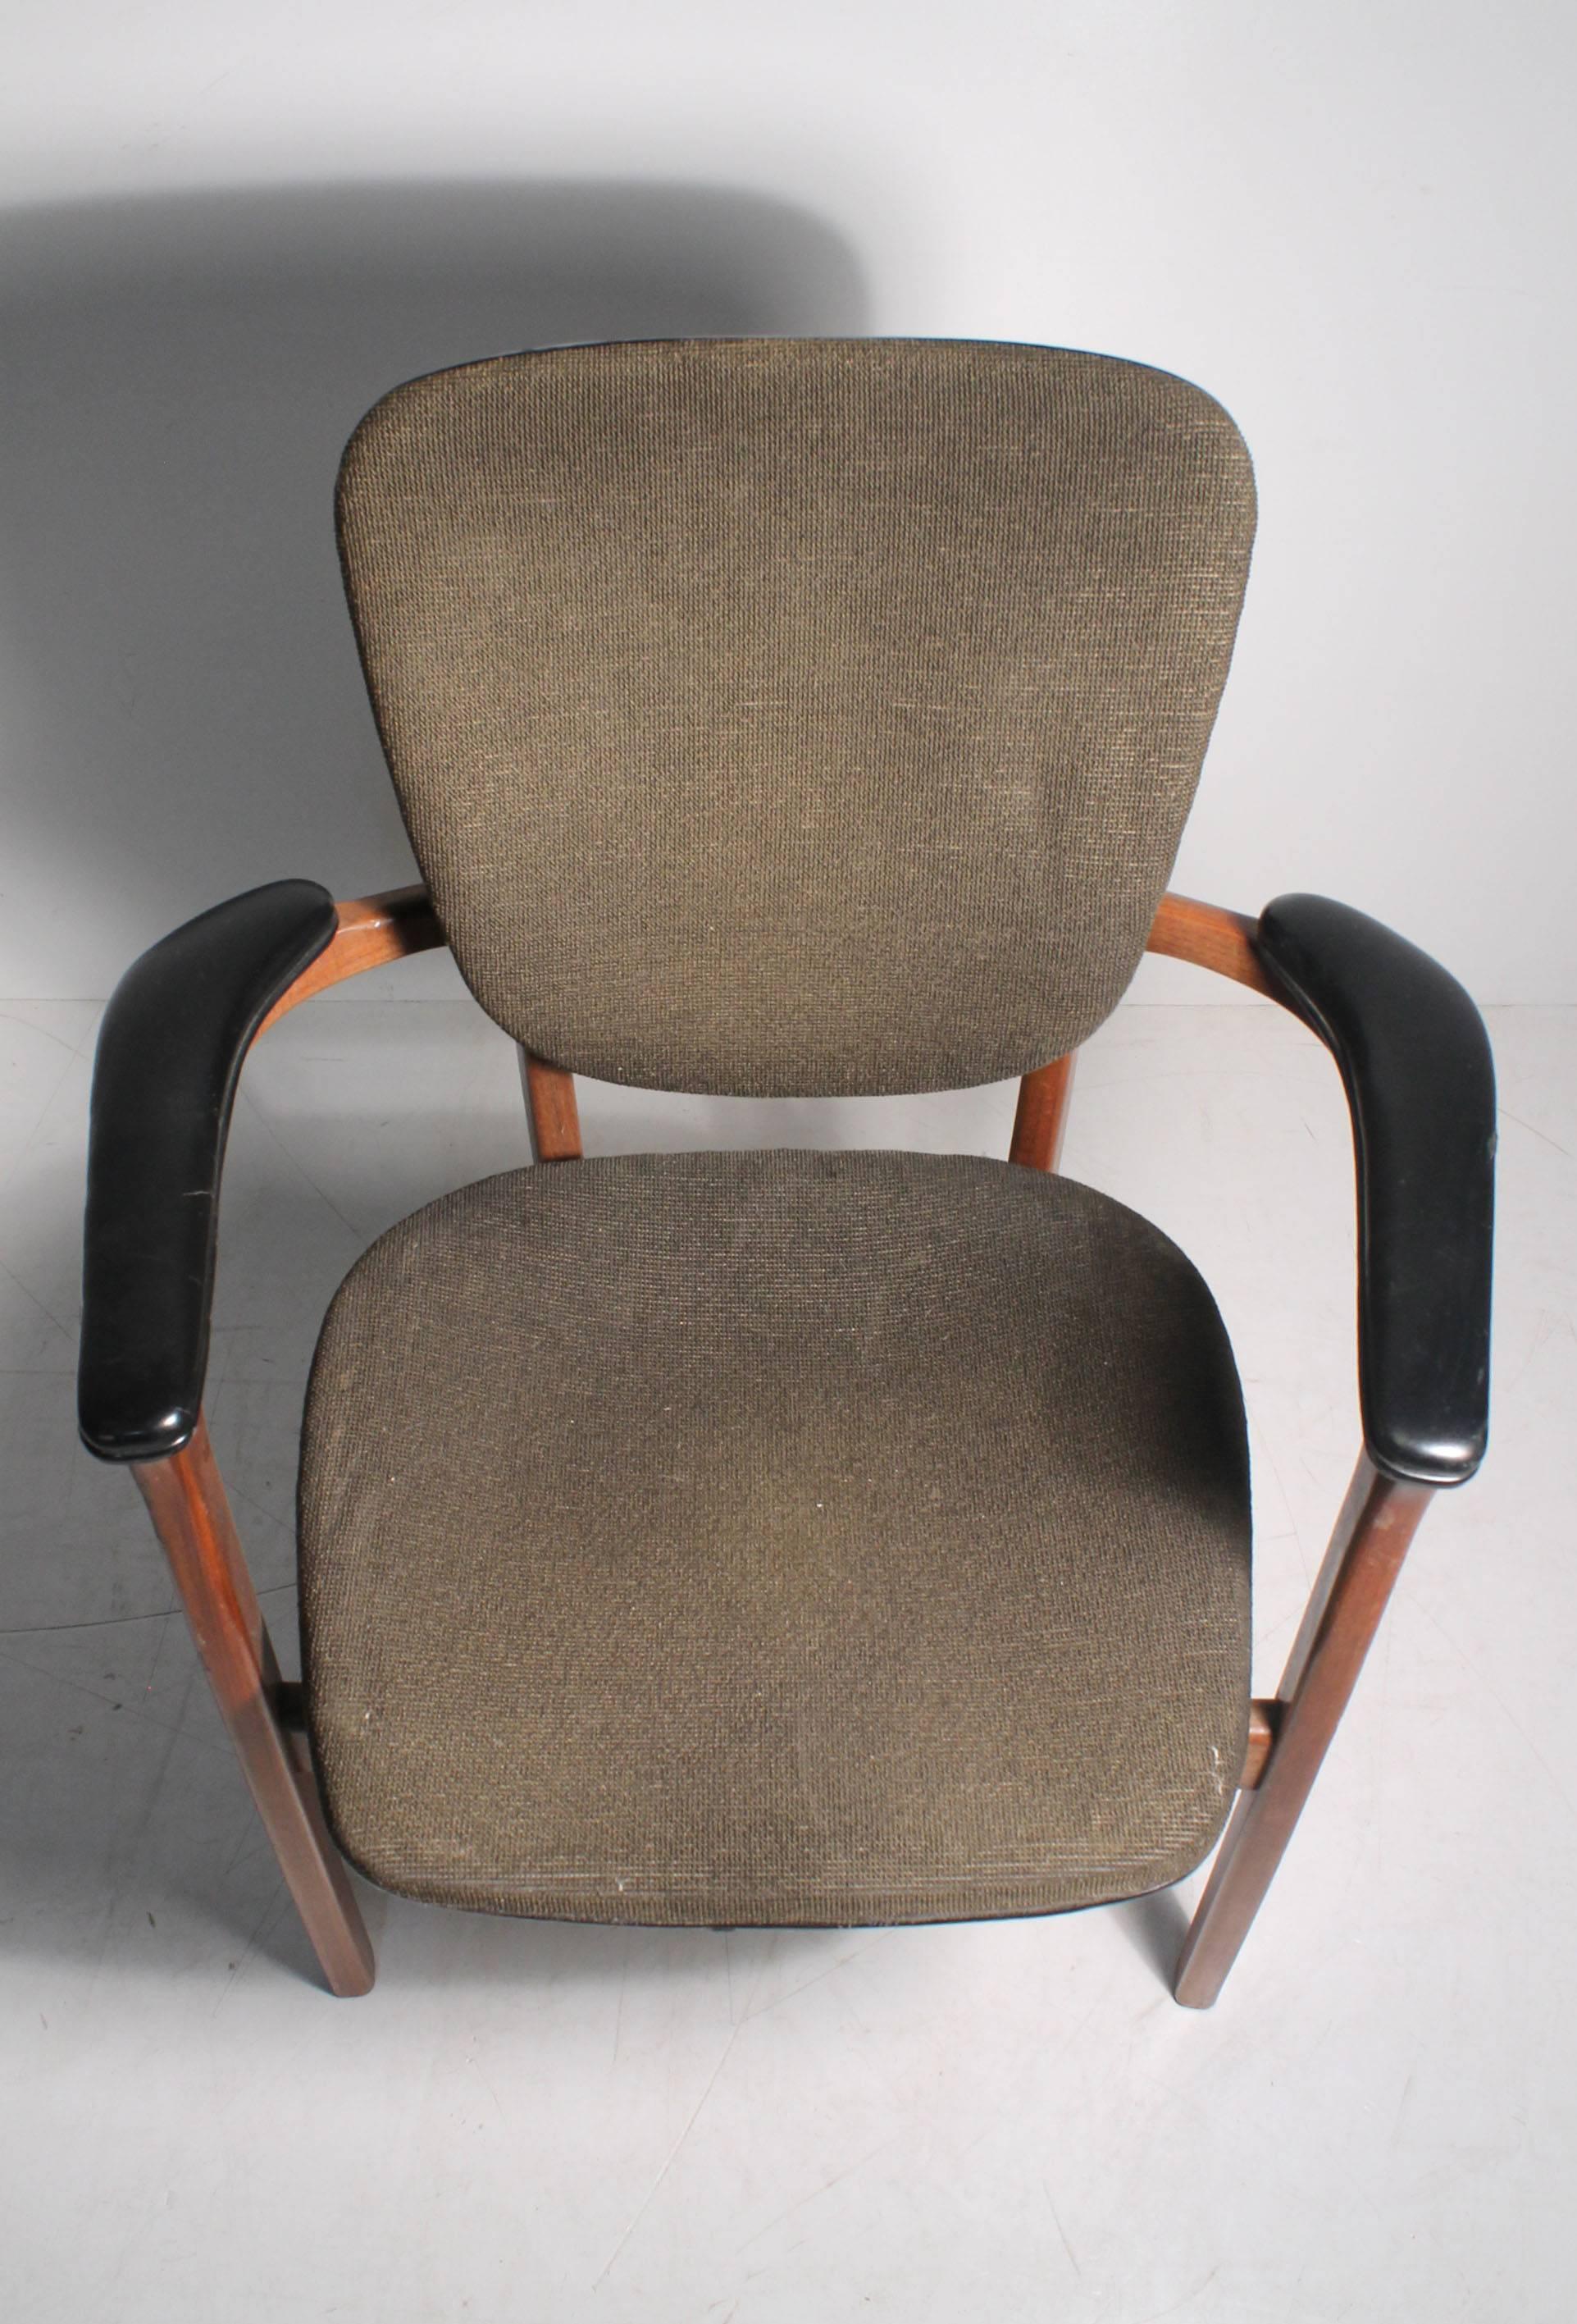 Wood Rare Adrian Pearsall Armchair For Sale